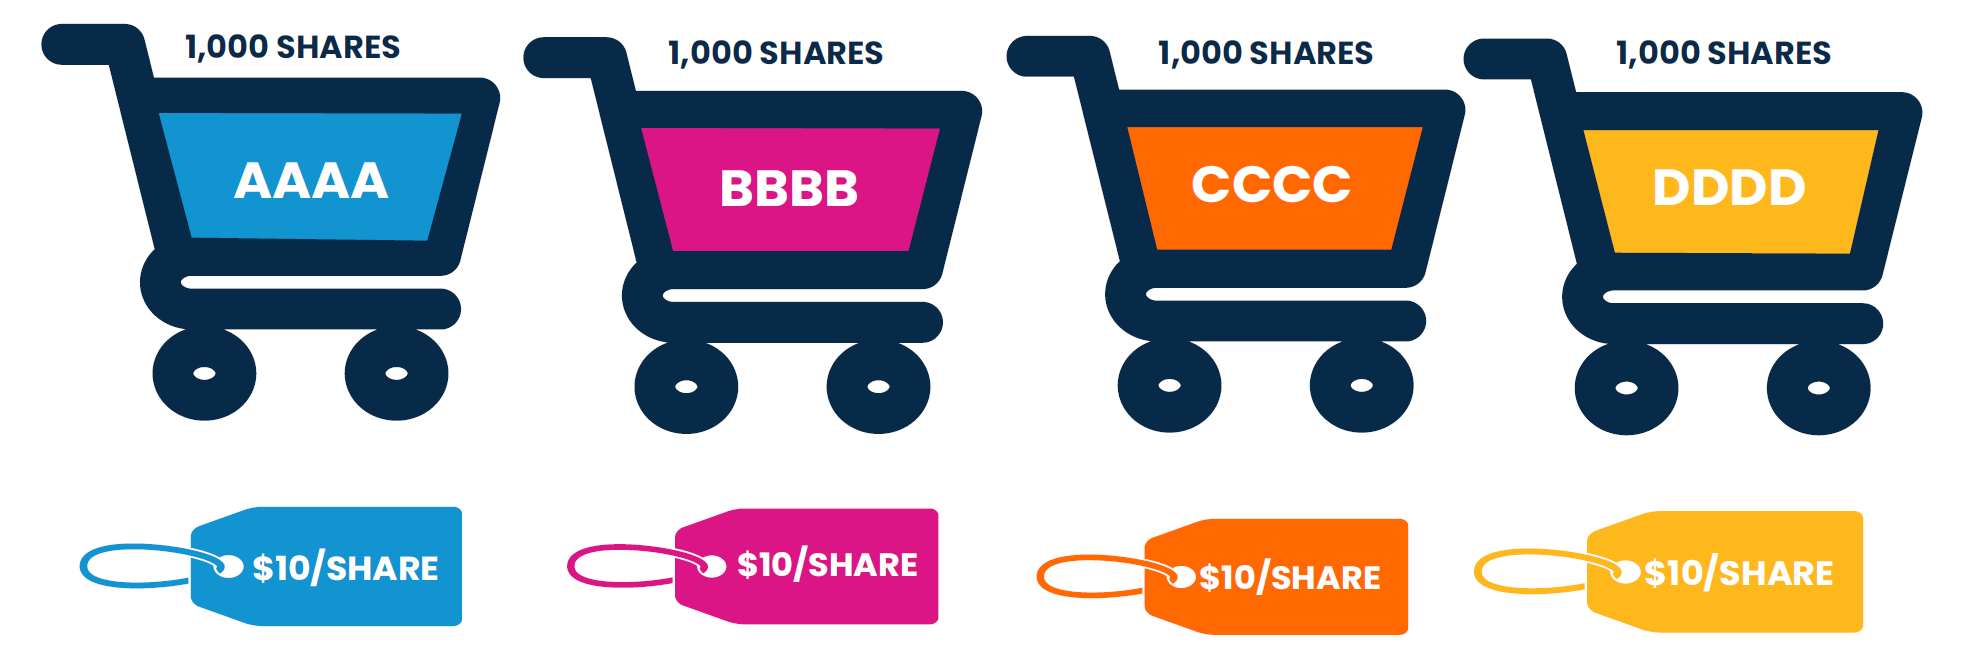 ETF Tax Primer Cart illustration showing 1,000 shares of AAAA, BBBB, CCCC, and DDDD at $10 per share.